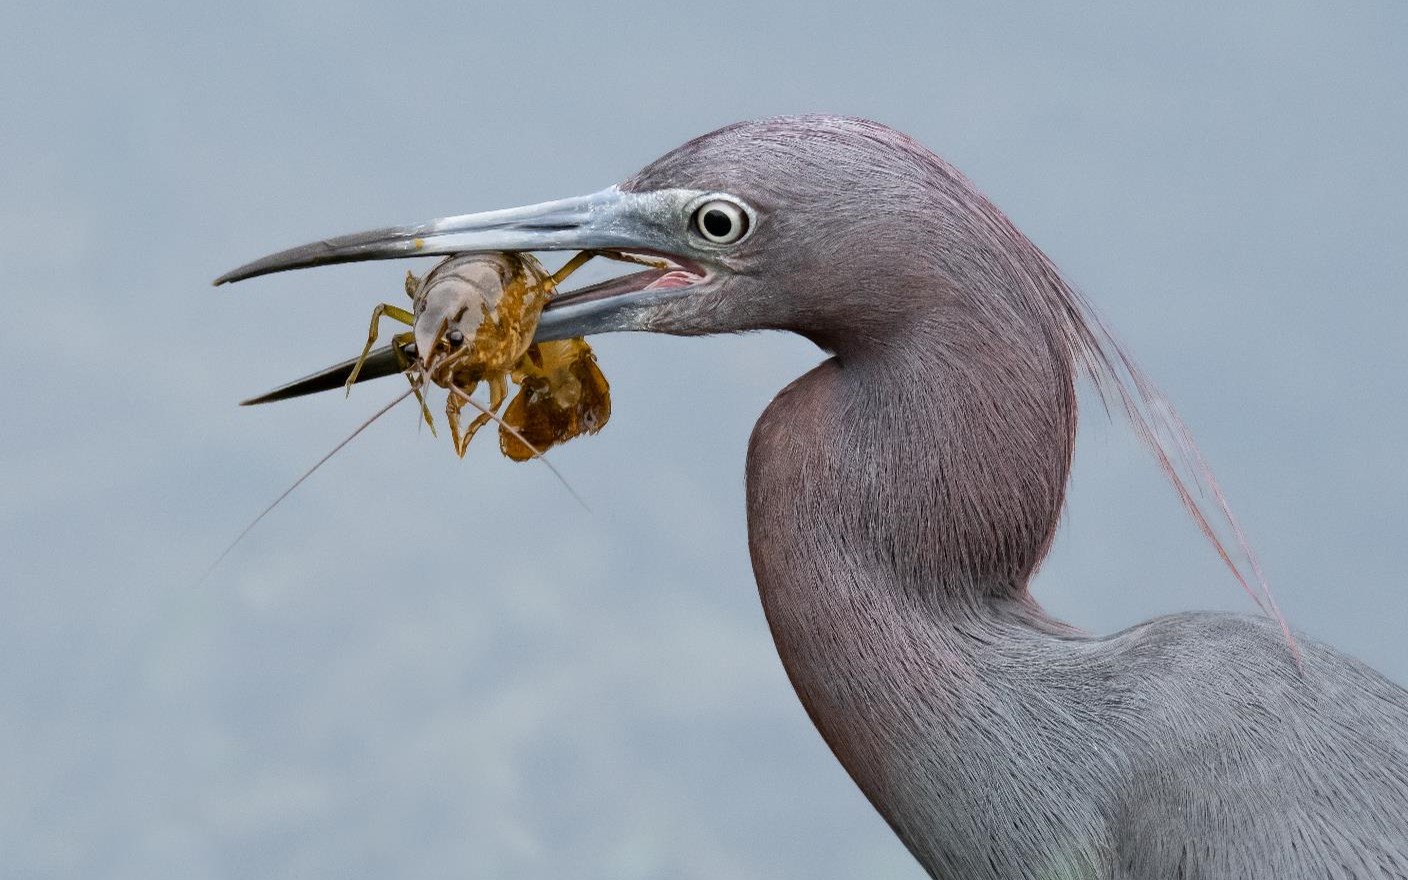 "Just a Little Eye-to-Eye-Little Blue Heron with Lil Crayfish" Novice 3rd Place: Lee Ann Posavad, Championsgate